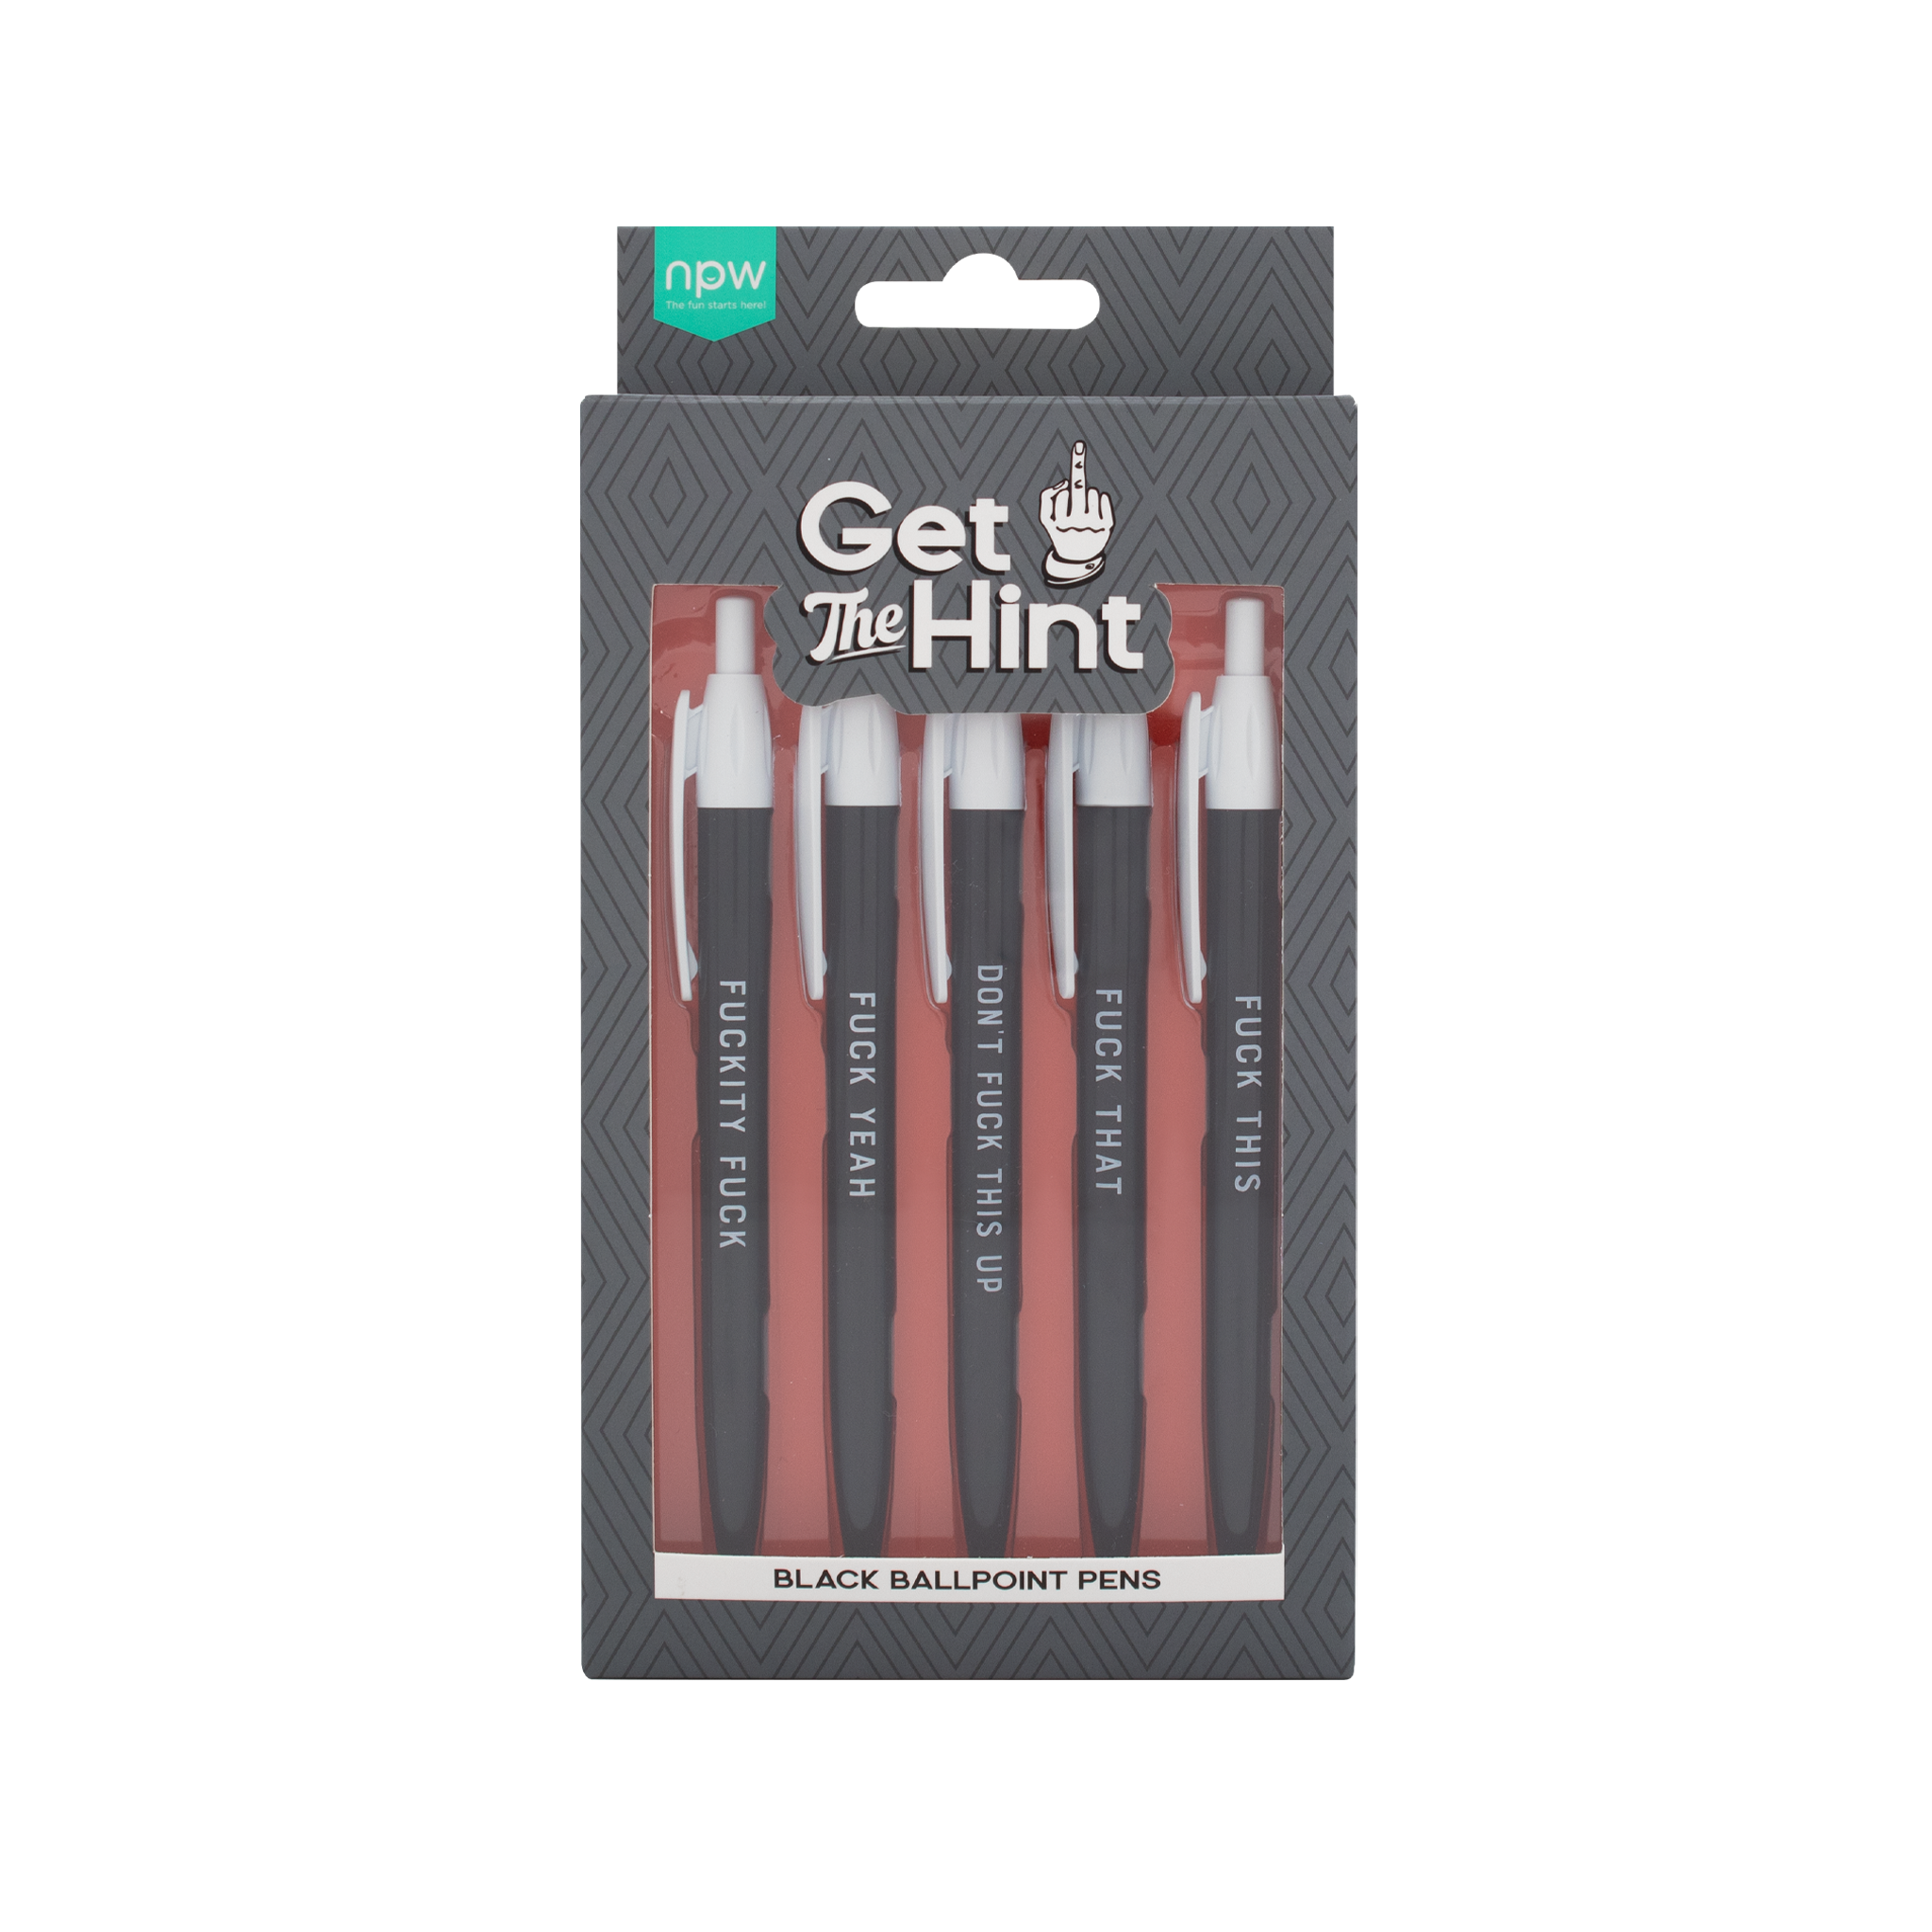 Get The F*cking Hint Ballpoint Pens - Unique Gifts - NPW — Perpetual Kid